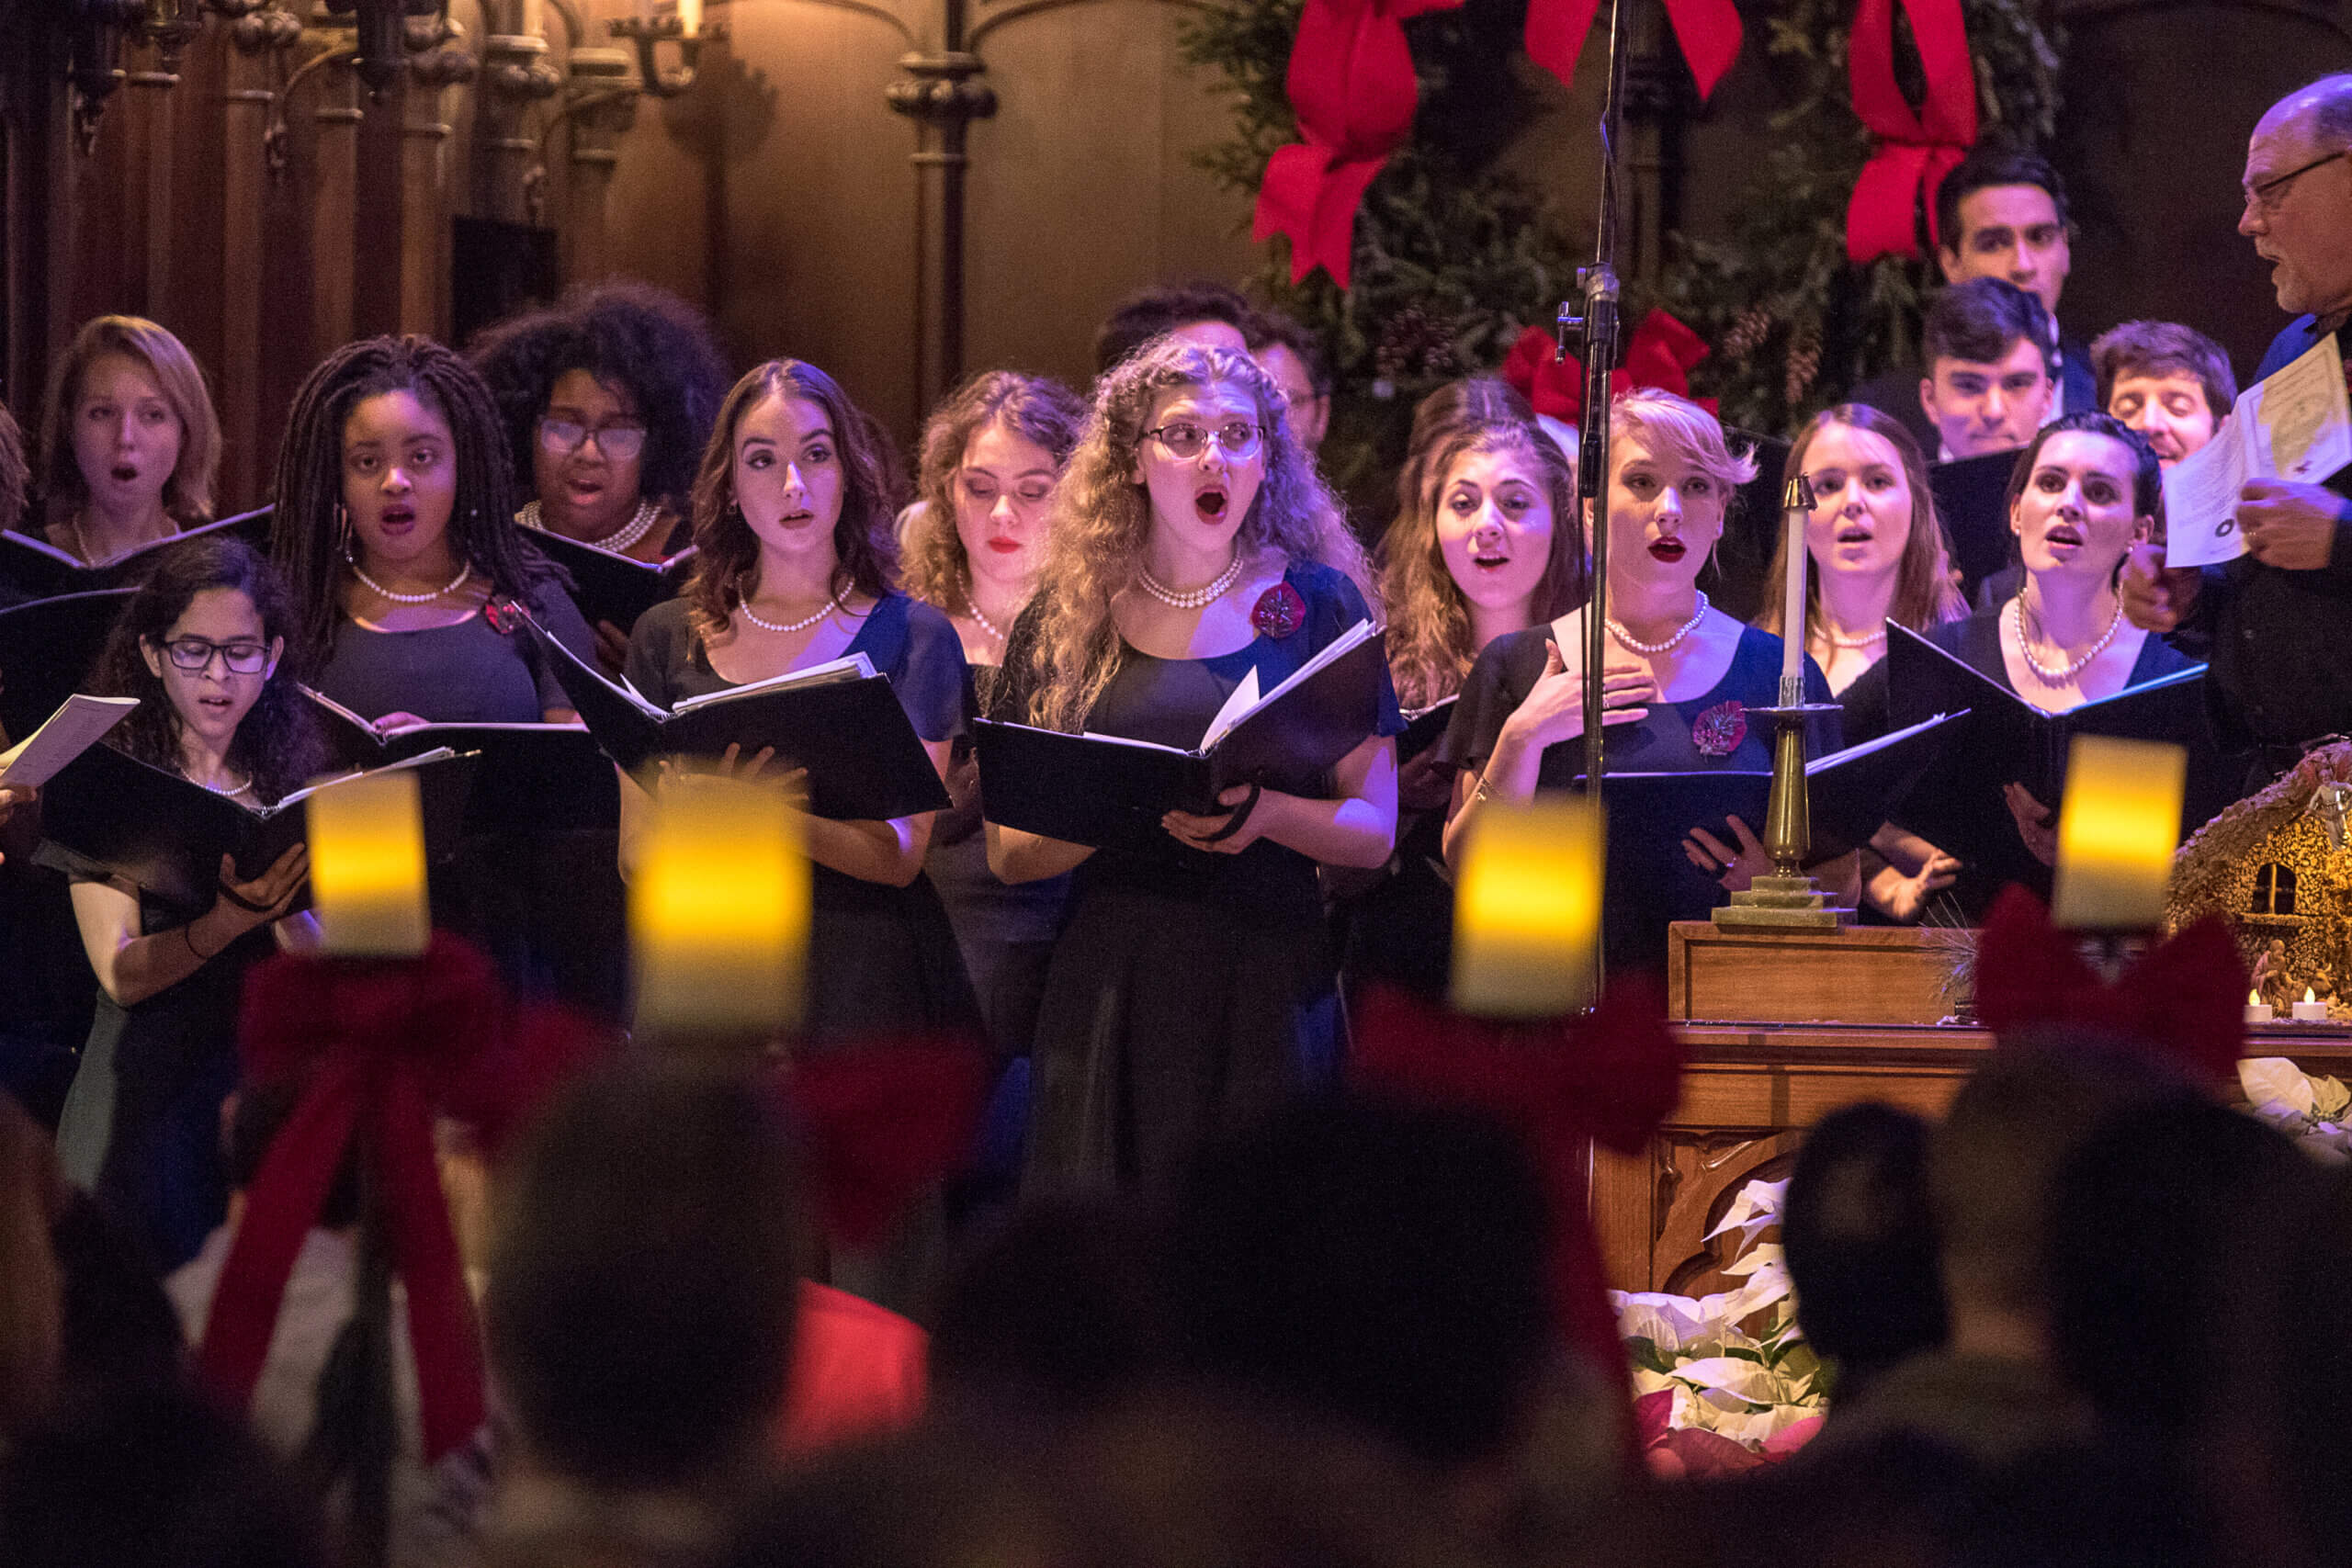 Young women in black dresses sing in a choir with candles in the foreground.